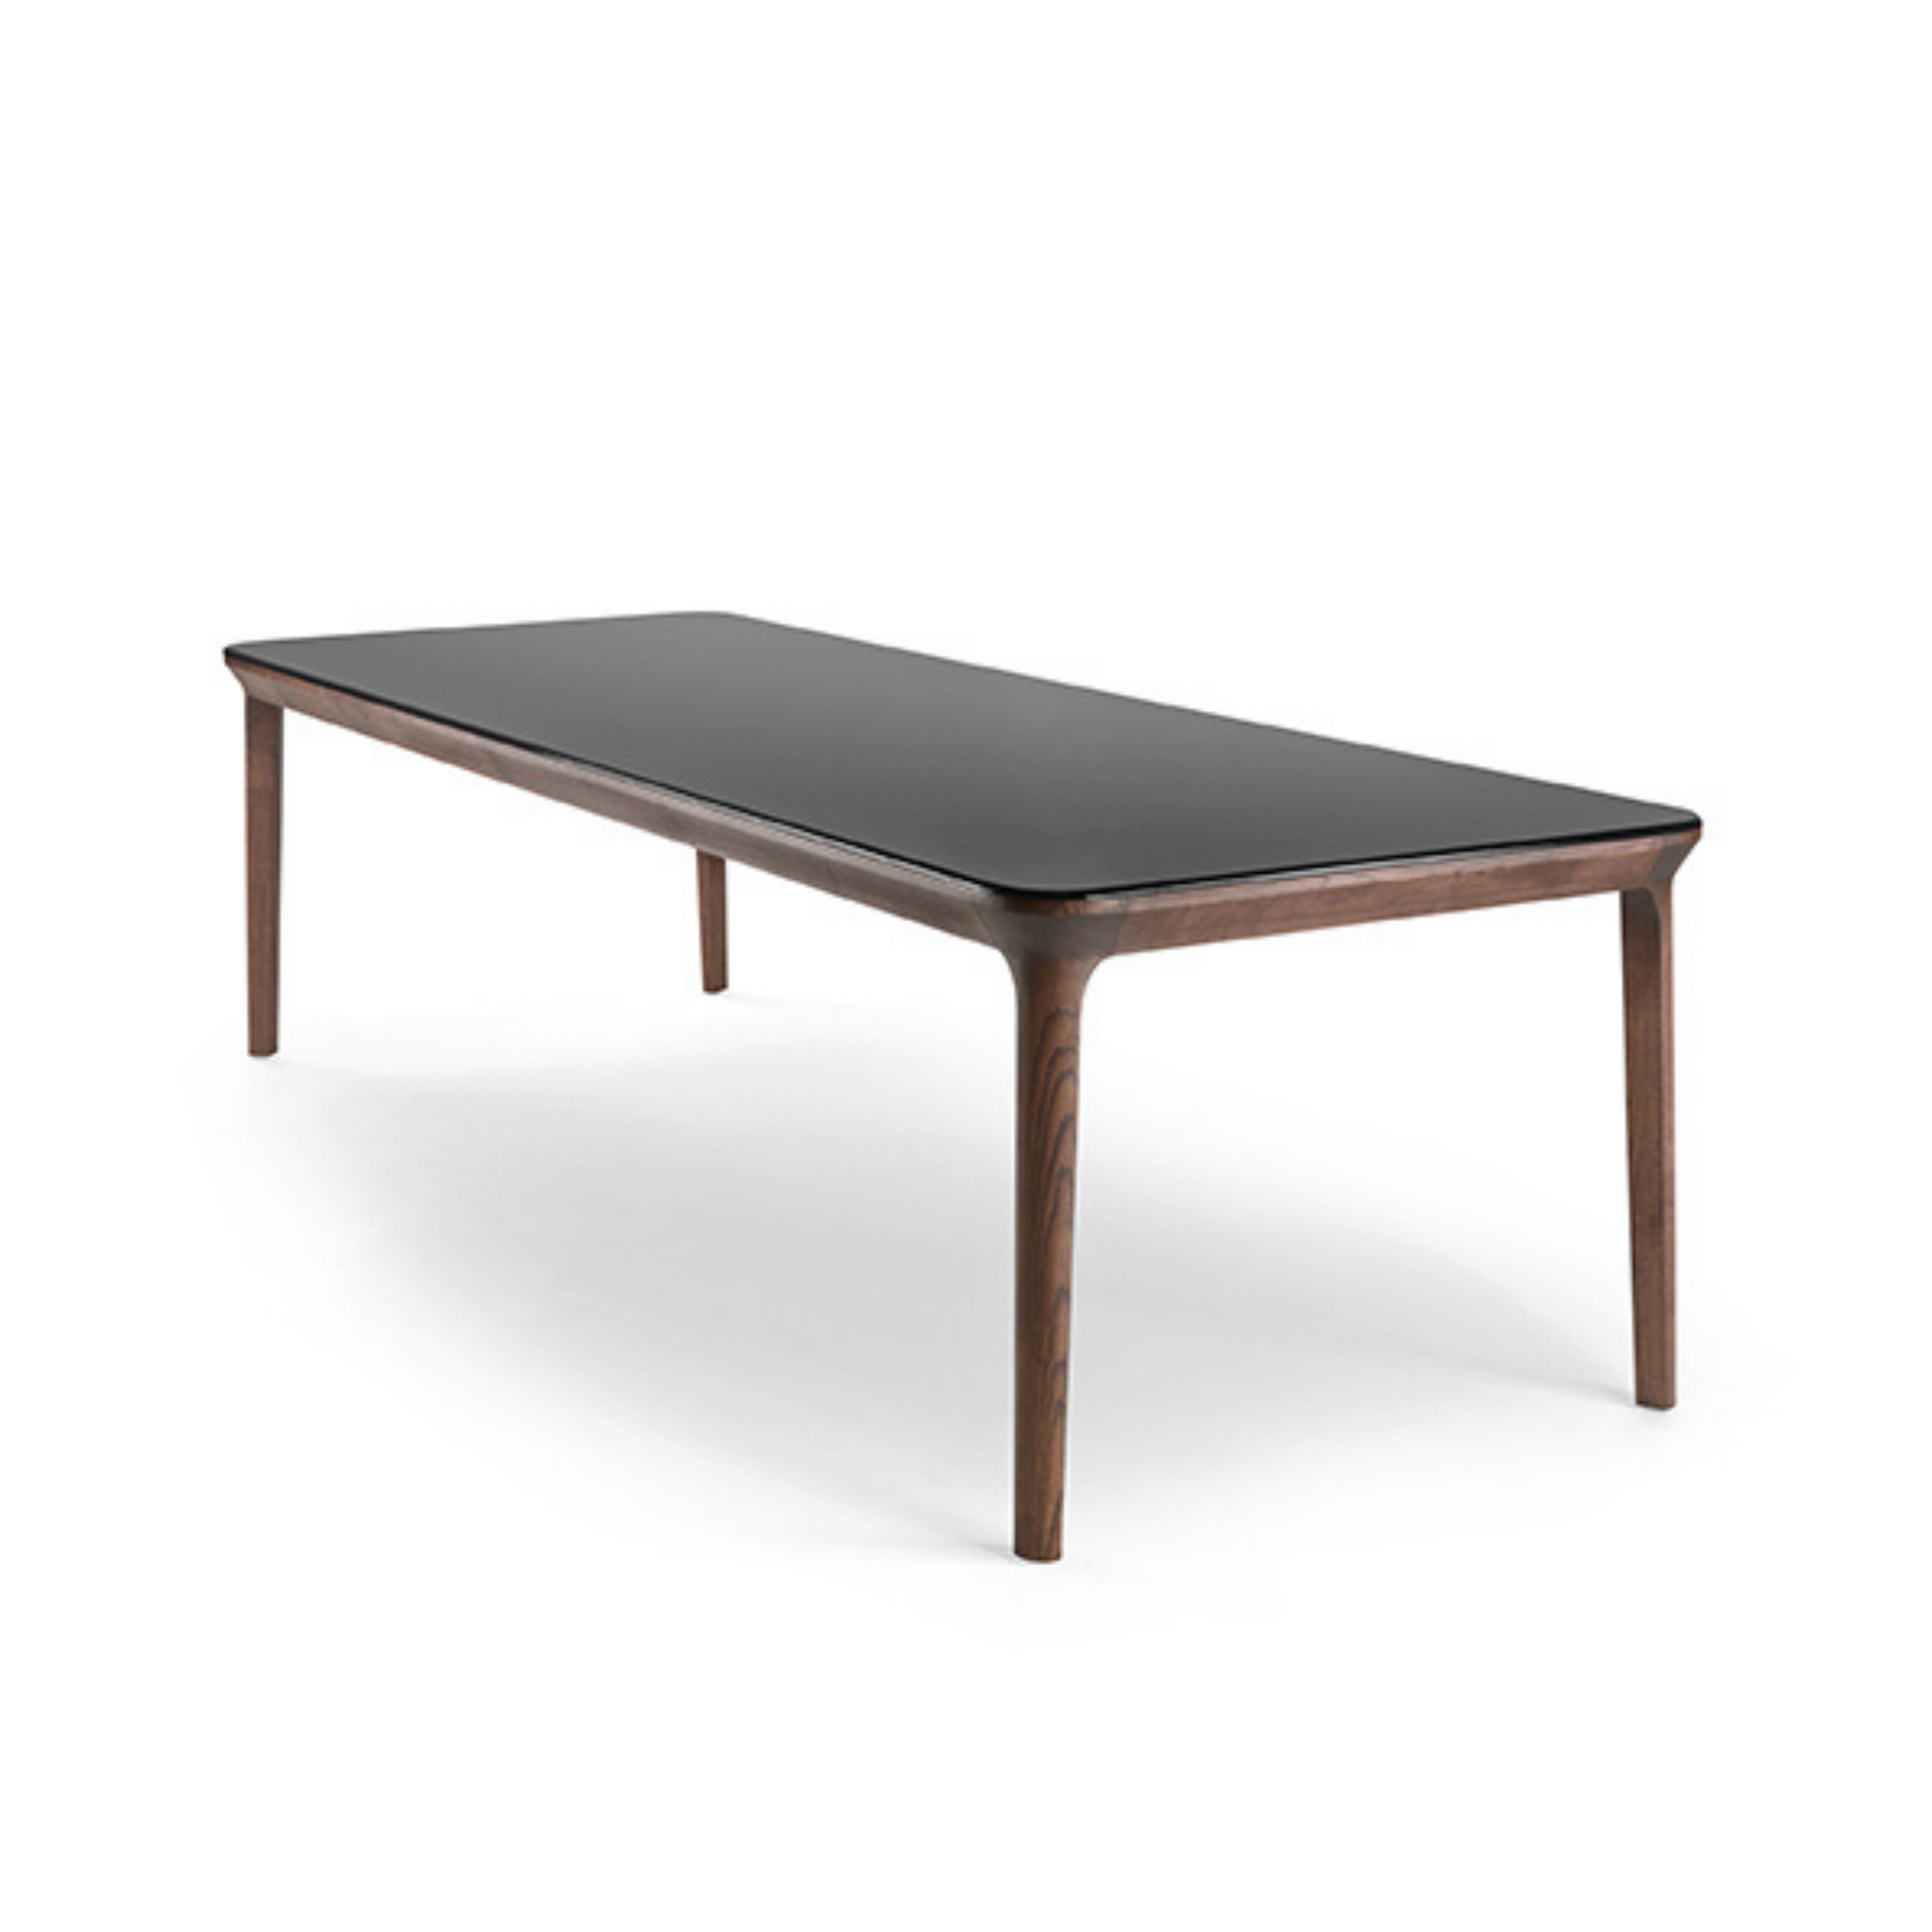 An essential design, an apparent simplicity for a table of complex details and finishes.